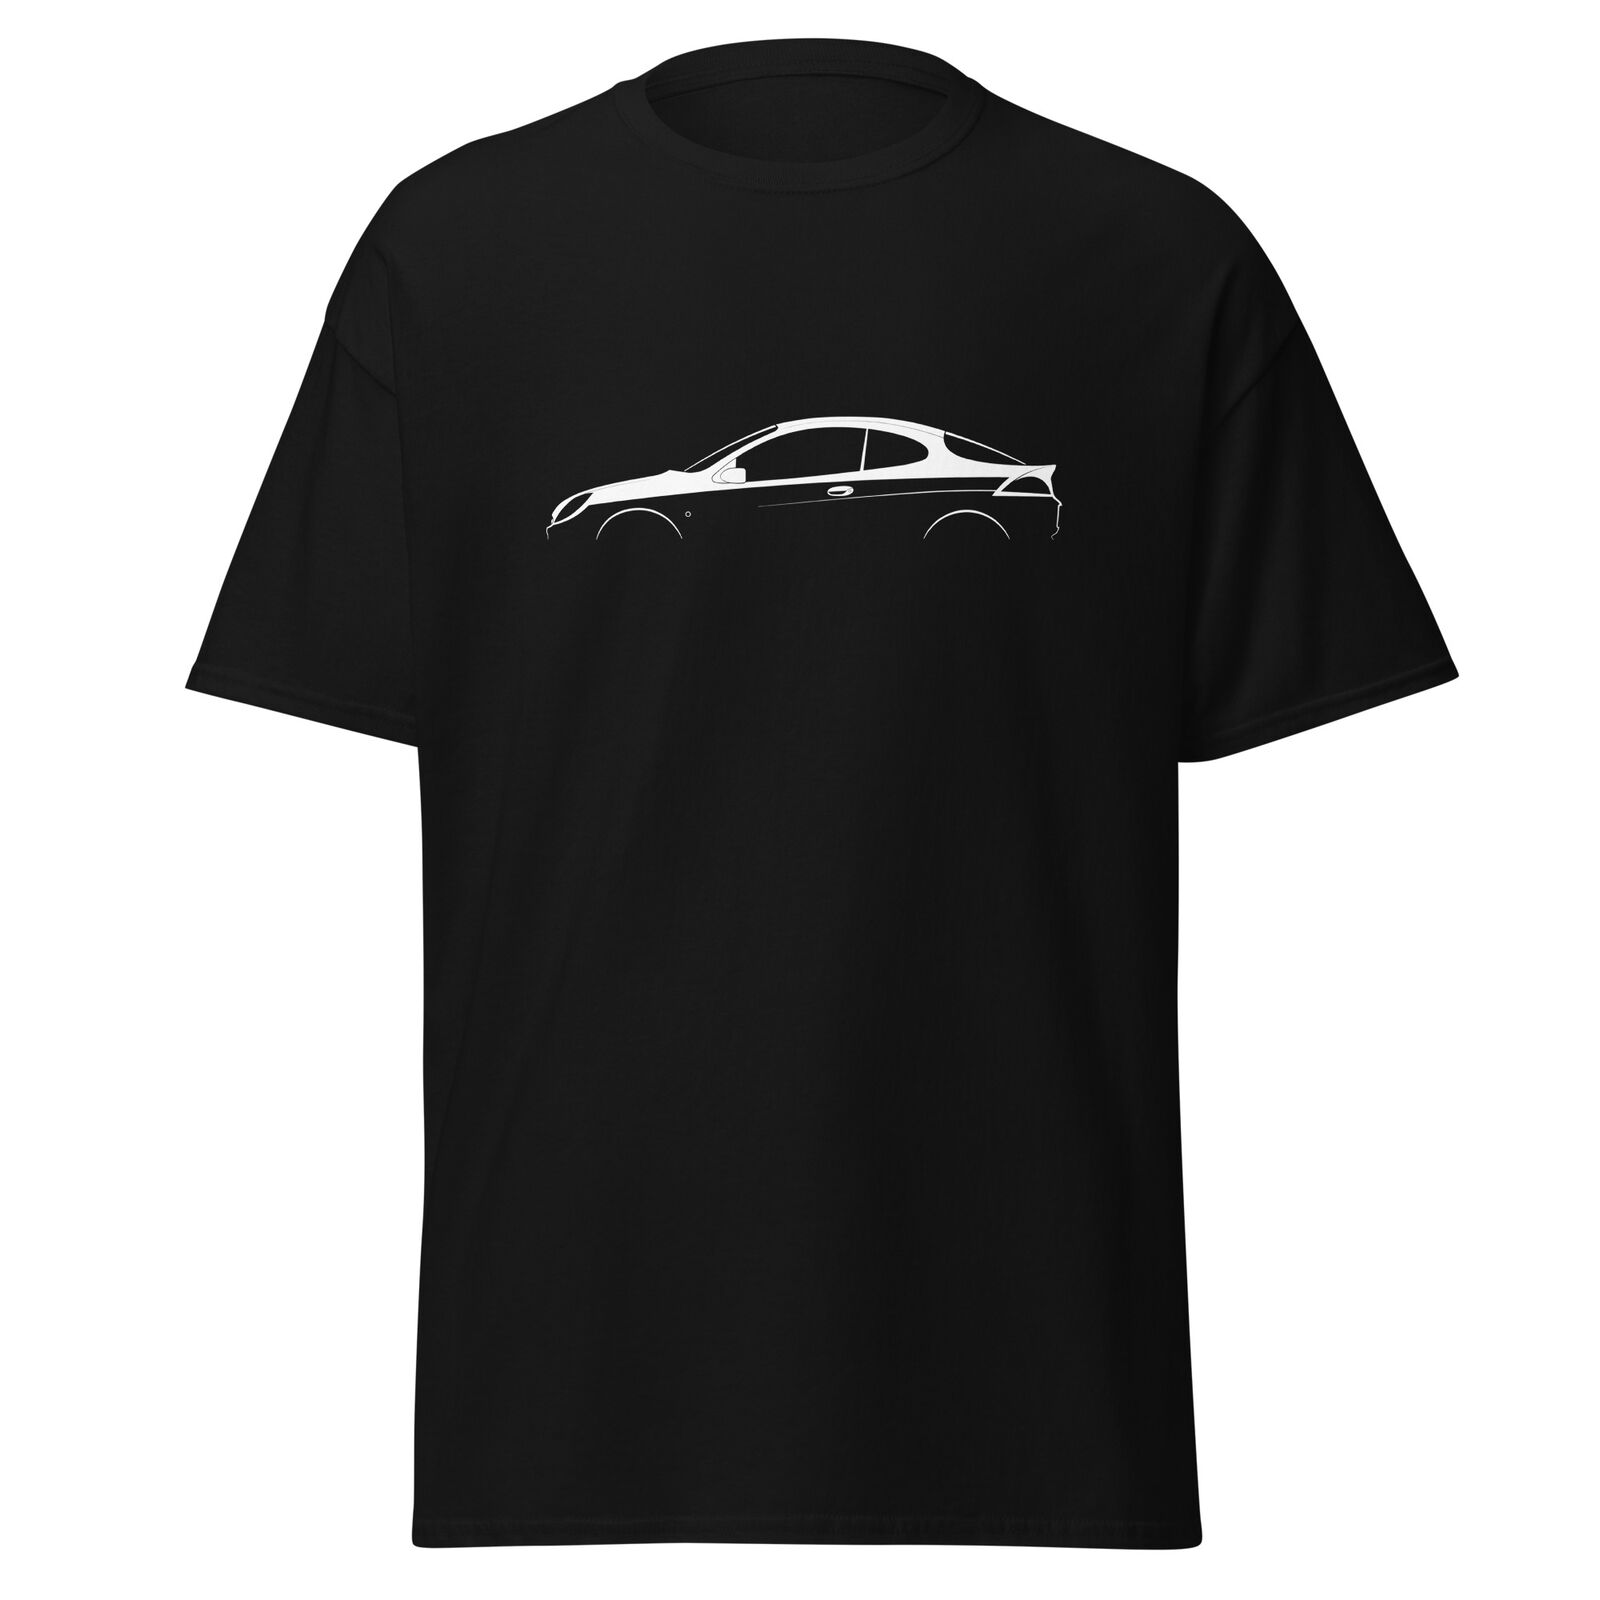 T-shirt For Ford Puma 1997-2001 Fans